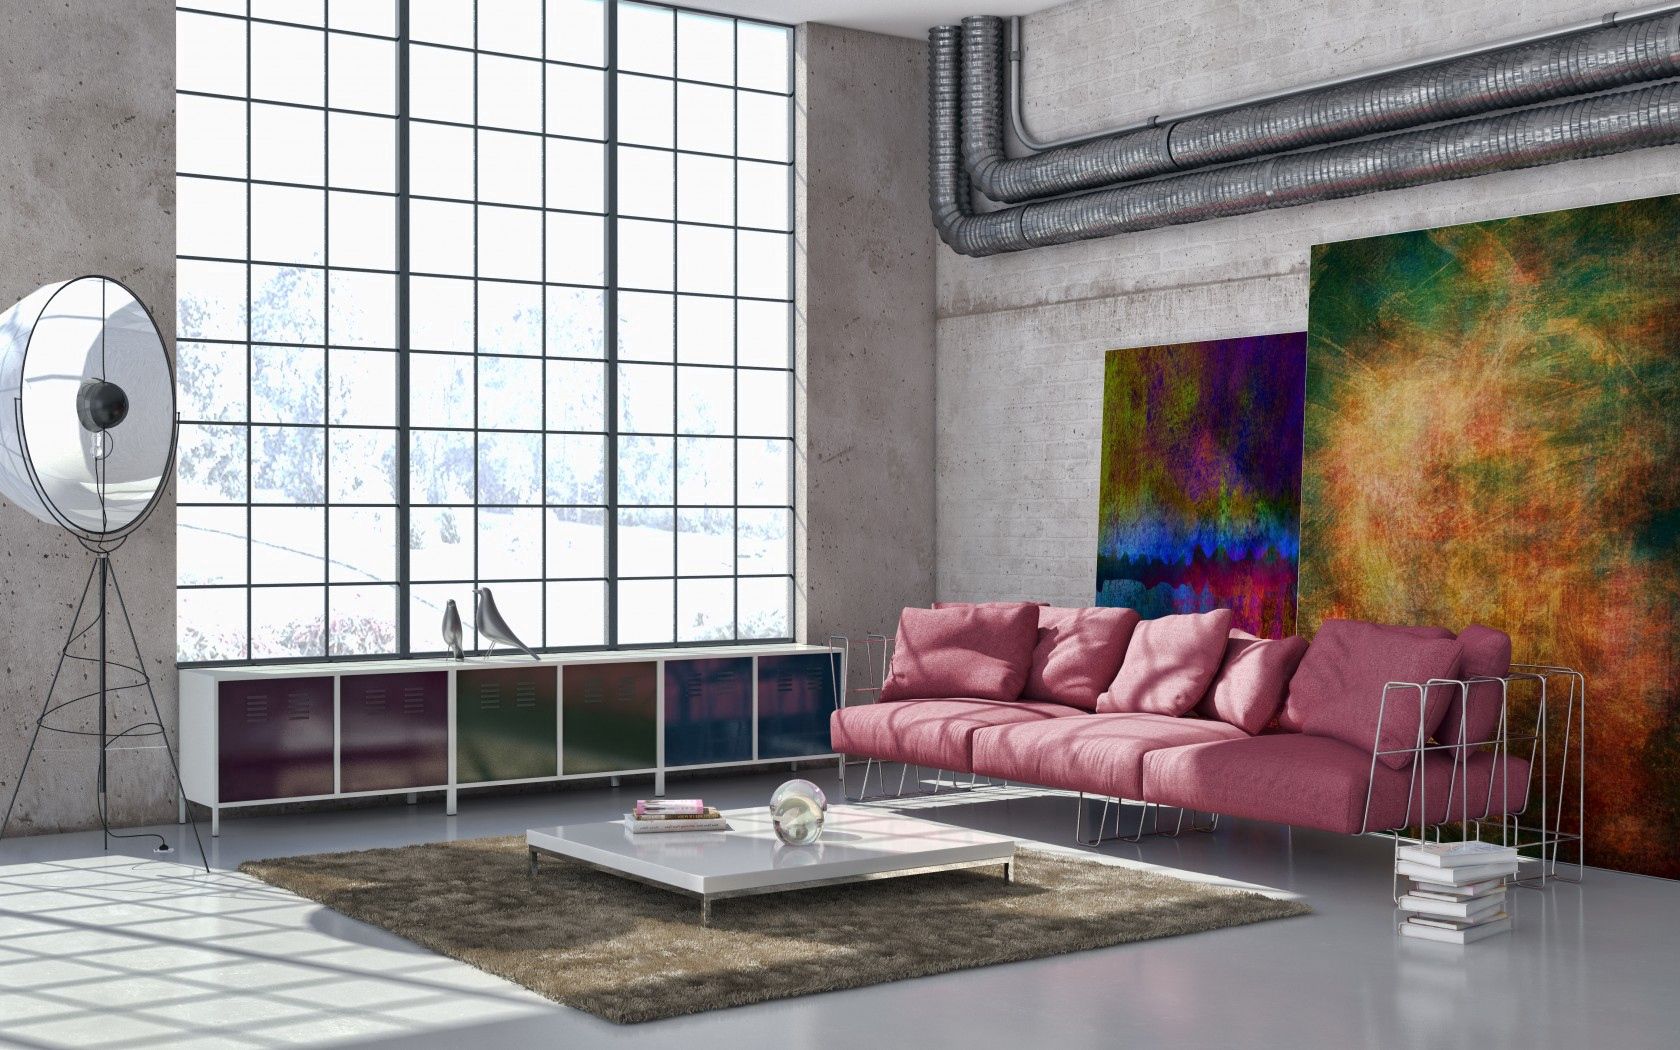 paintings, books, miscellanea, miscellaneous, window, table, room, sofa, cushions, pillows, carpet, side table